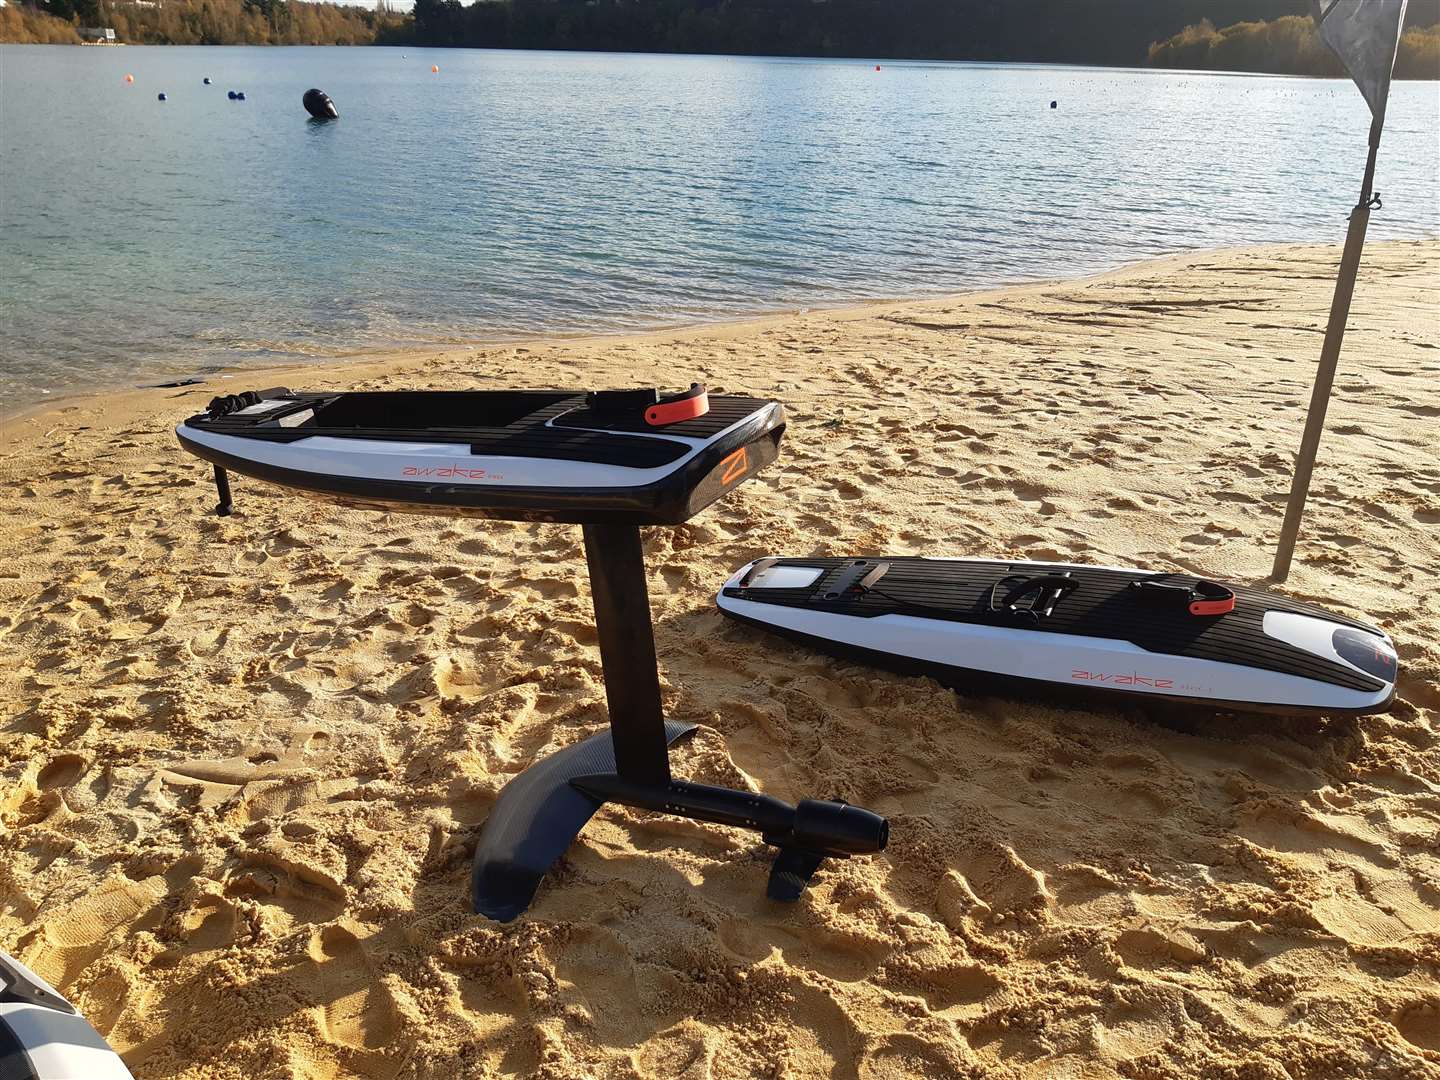 The jetboards offered by PSI Marine to try